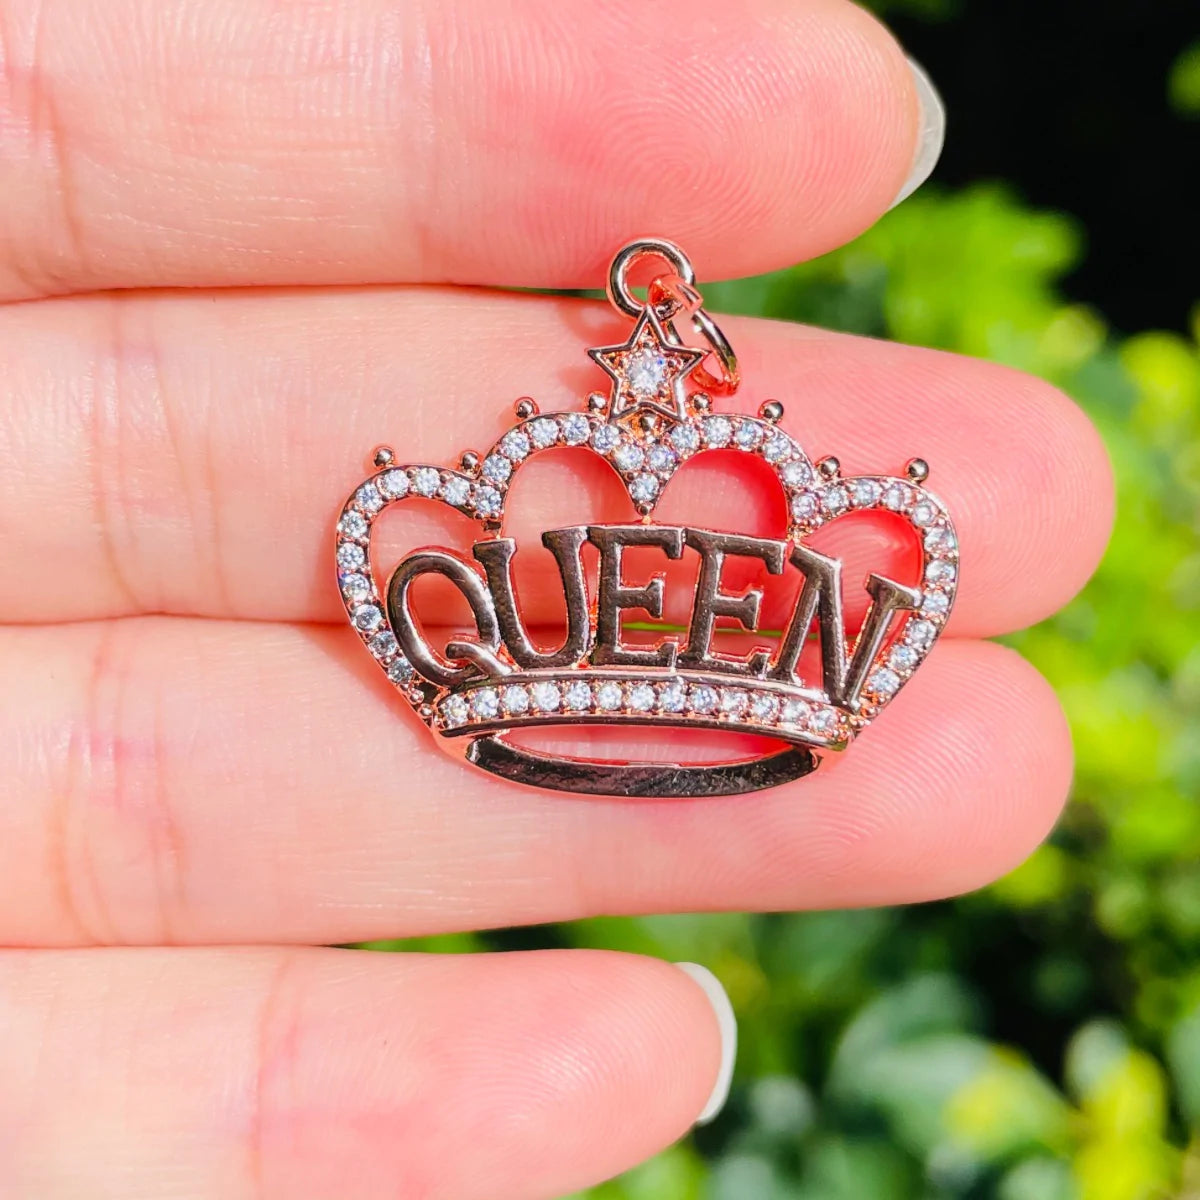 10pcs/lot 28*25mm CZ Paved Crown Queen Word Charms Rose Gold CZ Paved Charms Crowns New Charms Arrivals Queen Charms Charms Beads Beyond